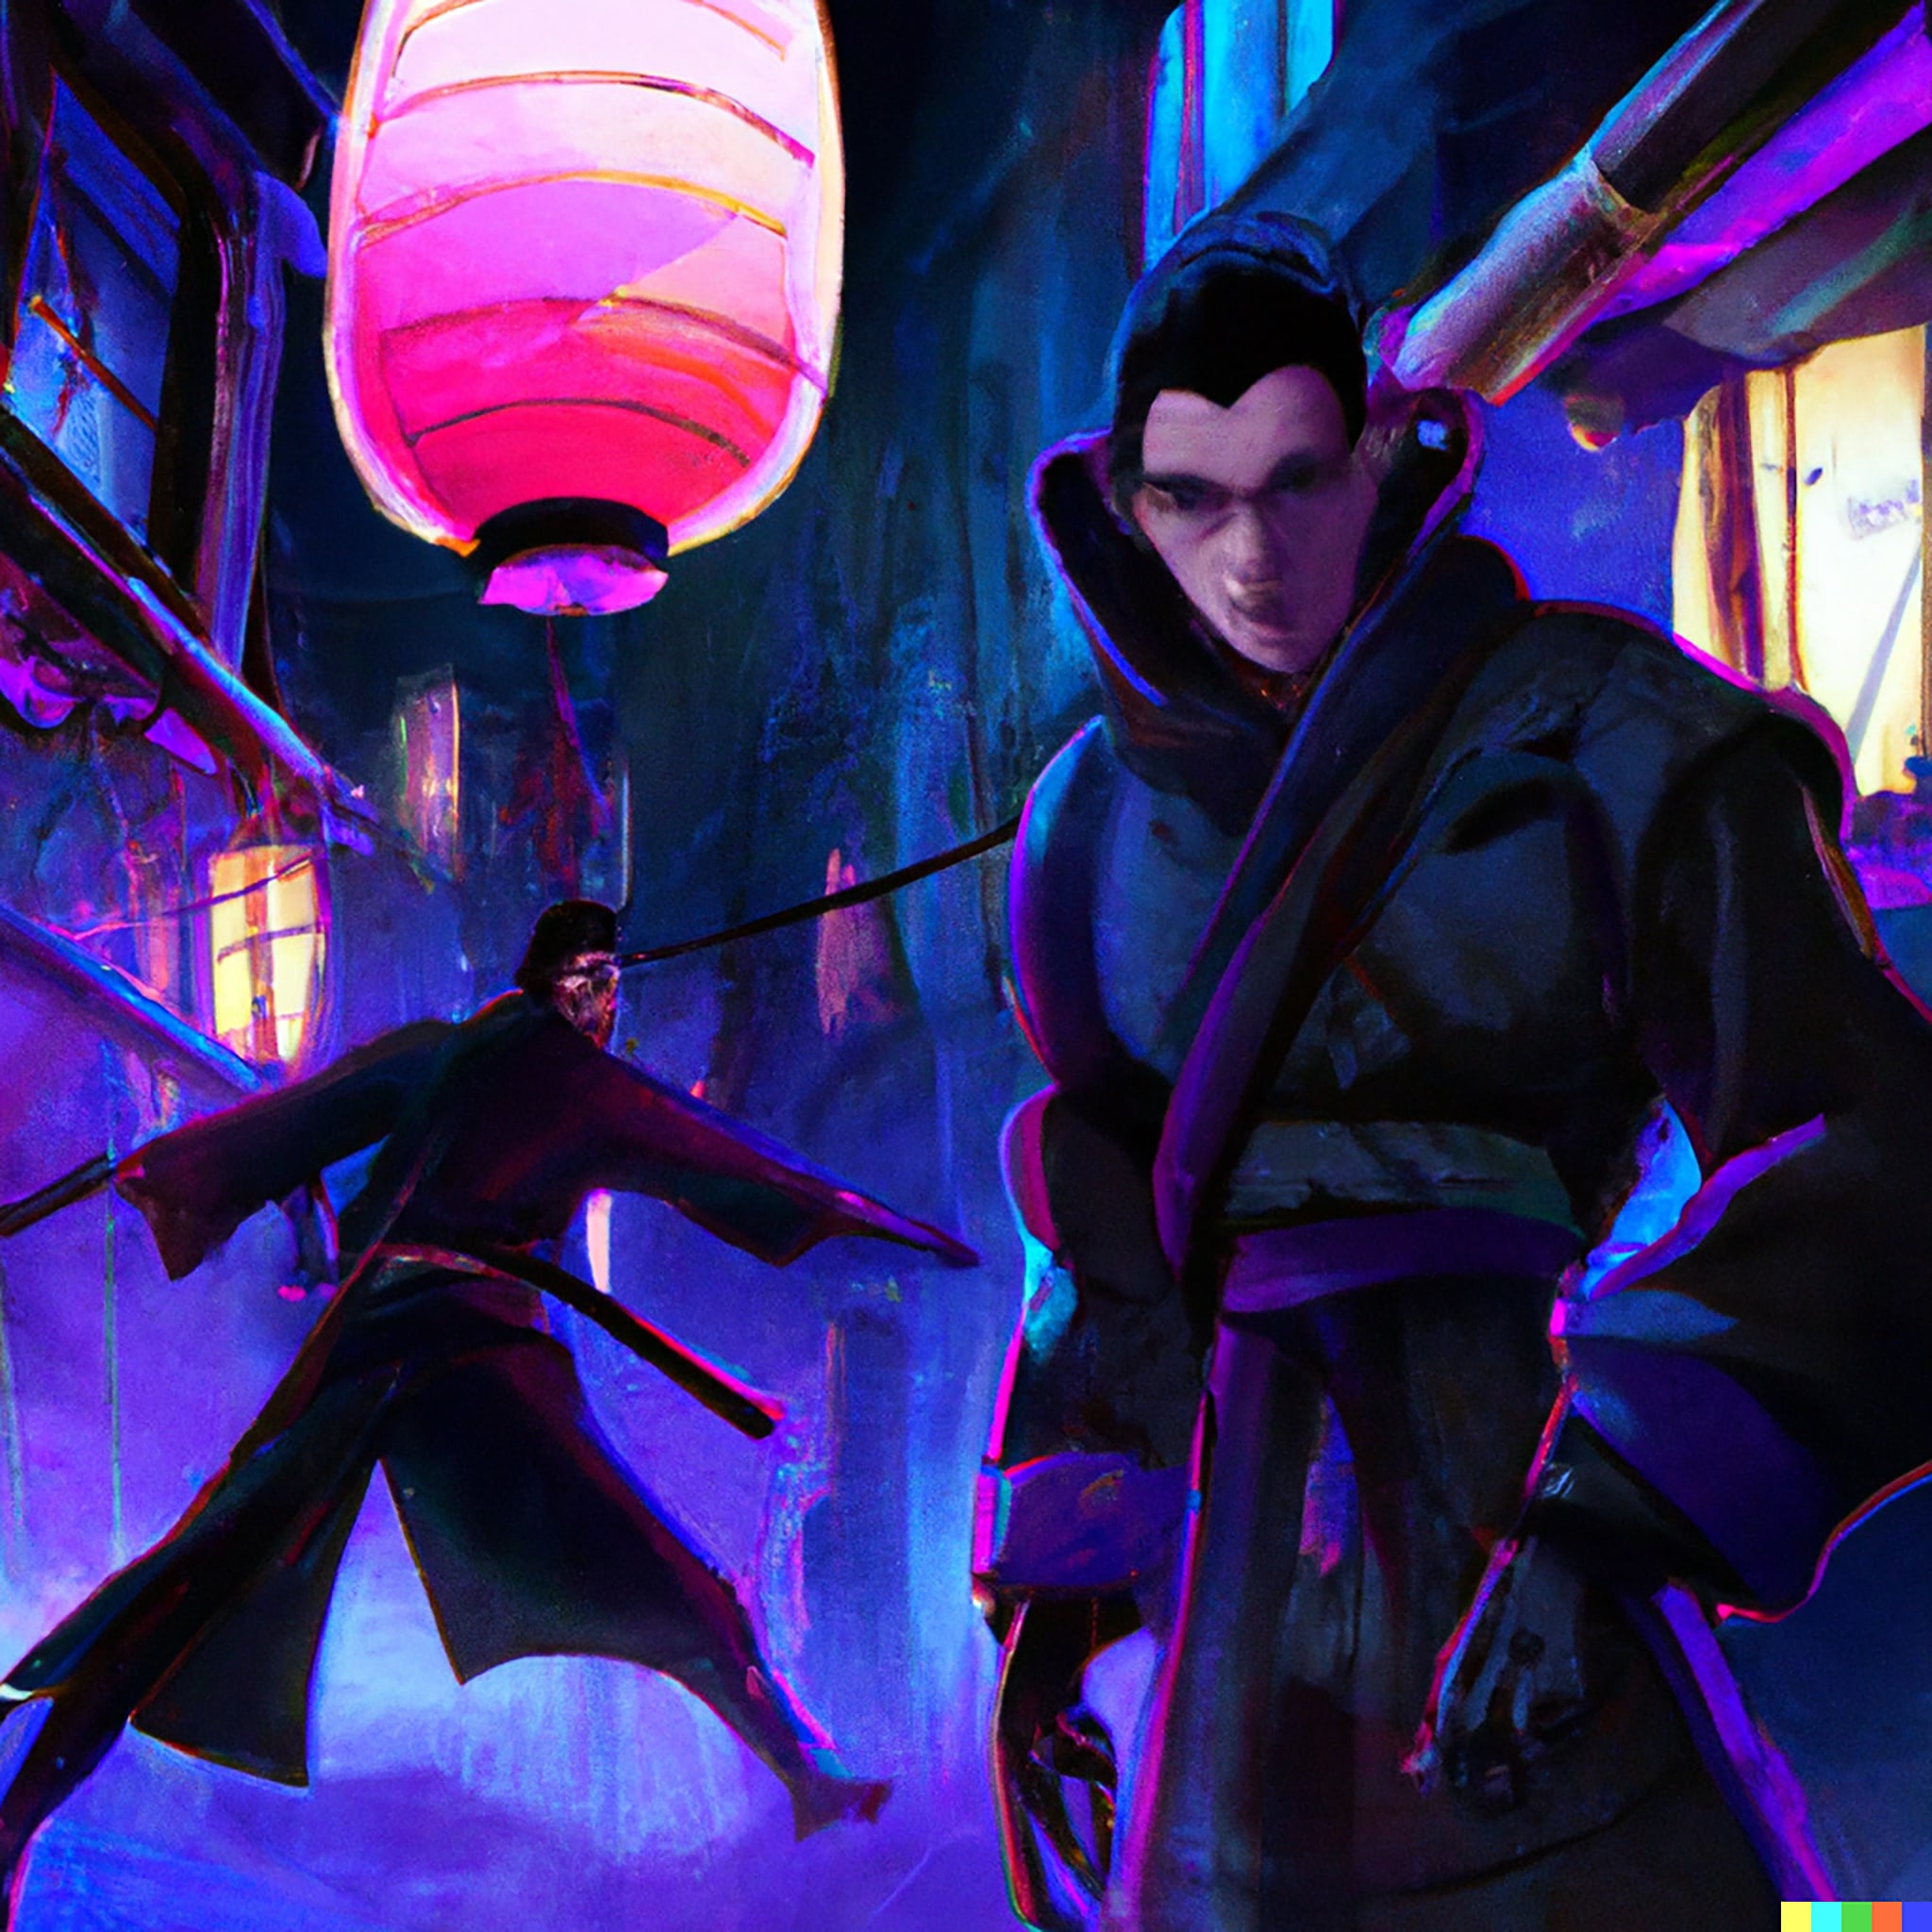 ninja-warrior-with-a-samurai-with-wild-clothes-in-a-alley-in-neo-tokyo-at-night-2